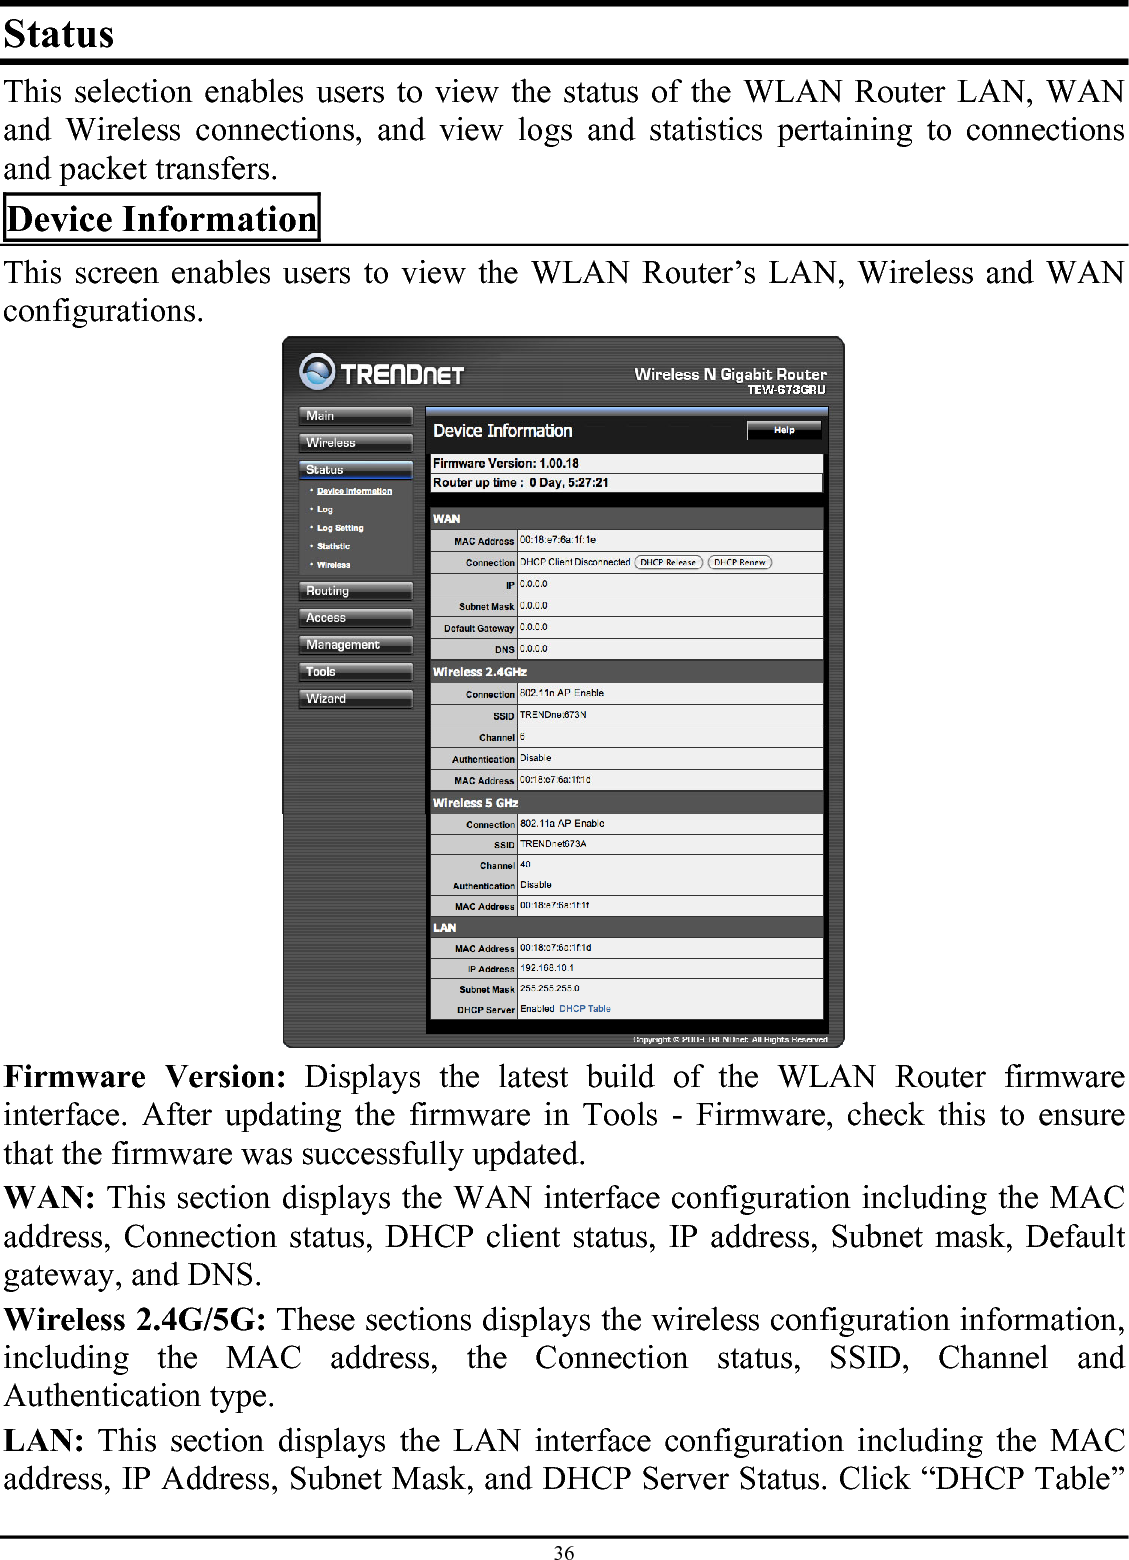 36 Status This selection enables users to view the status of the WLAN Router LAN, WAN and Wireless connections, and view logs and statistics pertaining to connections and packet transfers. Device Information This screen enables users to view the WLAN Router’s LAN, Wireless and WAN configurations.  Firmware Version: Displays the latest build of the WLAN Router firmware interface. After updating the firmware in Tools - Firmware, check this to ensure that the firmware was successfully updated. WAN: This section displays the WAN interface configuration including the MAC address, Connection status, DHCP client status, IP address, Subnet mask, Default gateway, and DNS.  Wireless 2.4G/5G: These sections displays the wireless configuration information, including the MAC address, the Connection status, SSID, Channel and Authentication type. LAN: This section displays the LAN interface configuration including the MAC address, IP Address, Subnet Mask, and DHCP Server Status. Click “DHCP Table” 